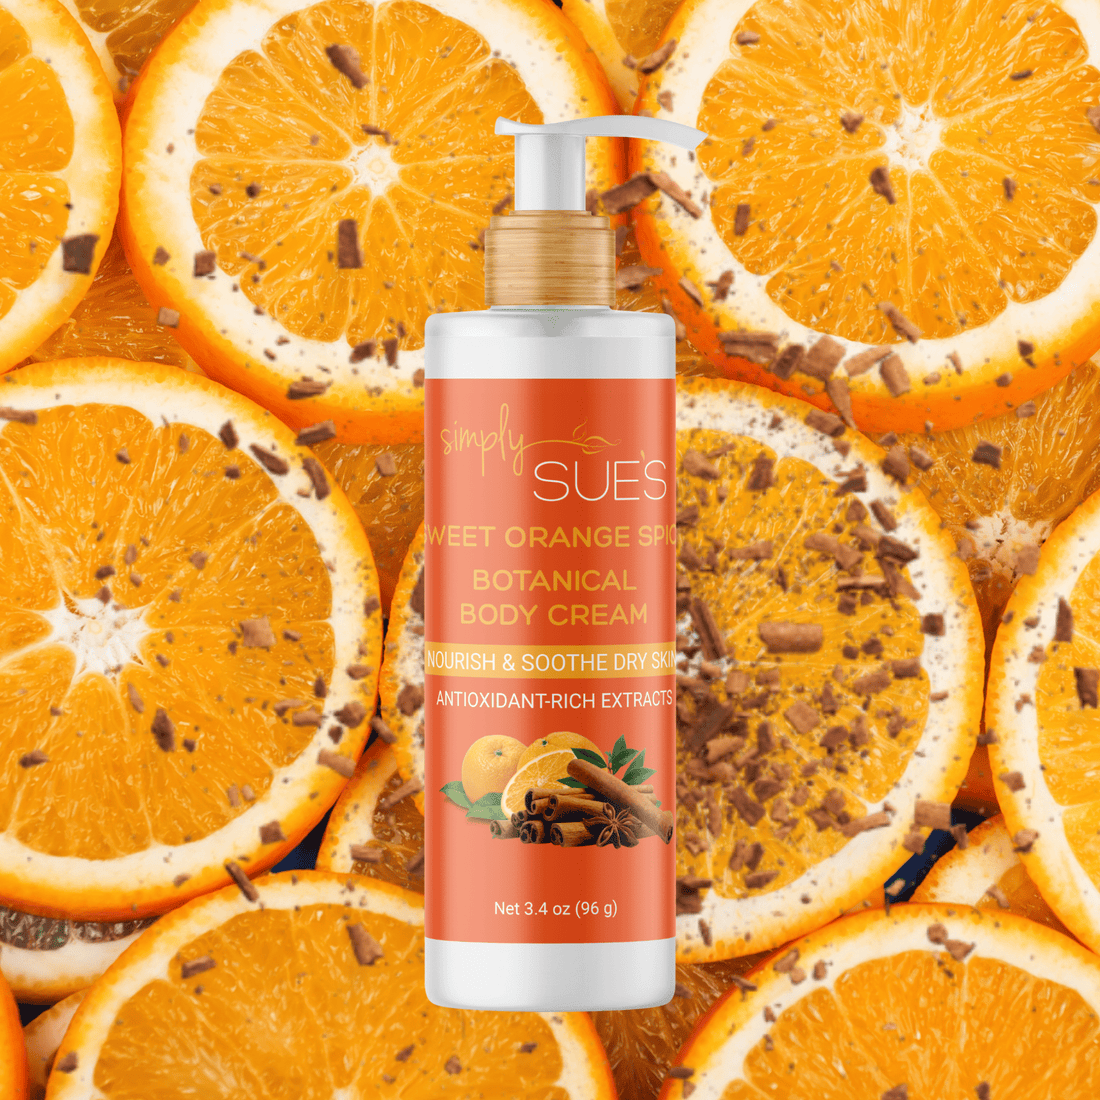 Simply Sue’s Sweet Orange Spice  Body Cream with a background of fresh orange slices dusted with cinnamon